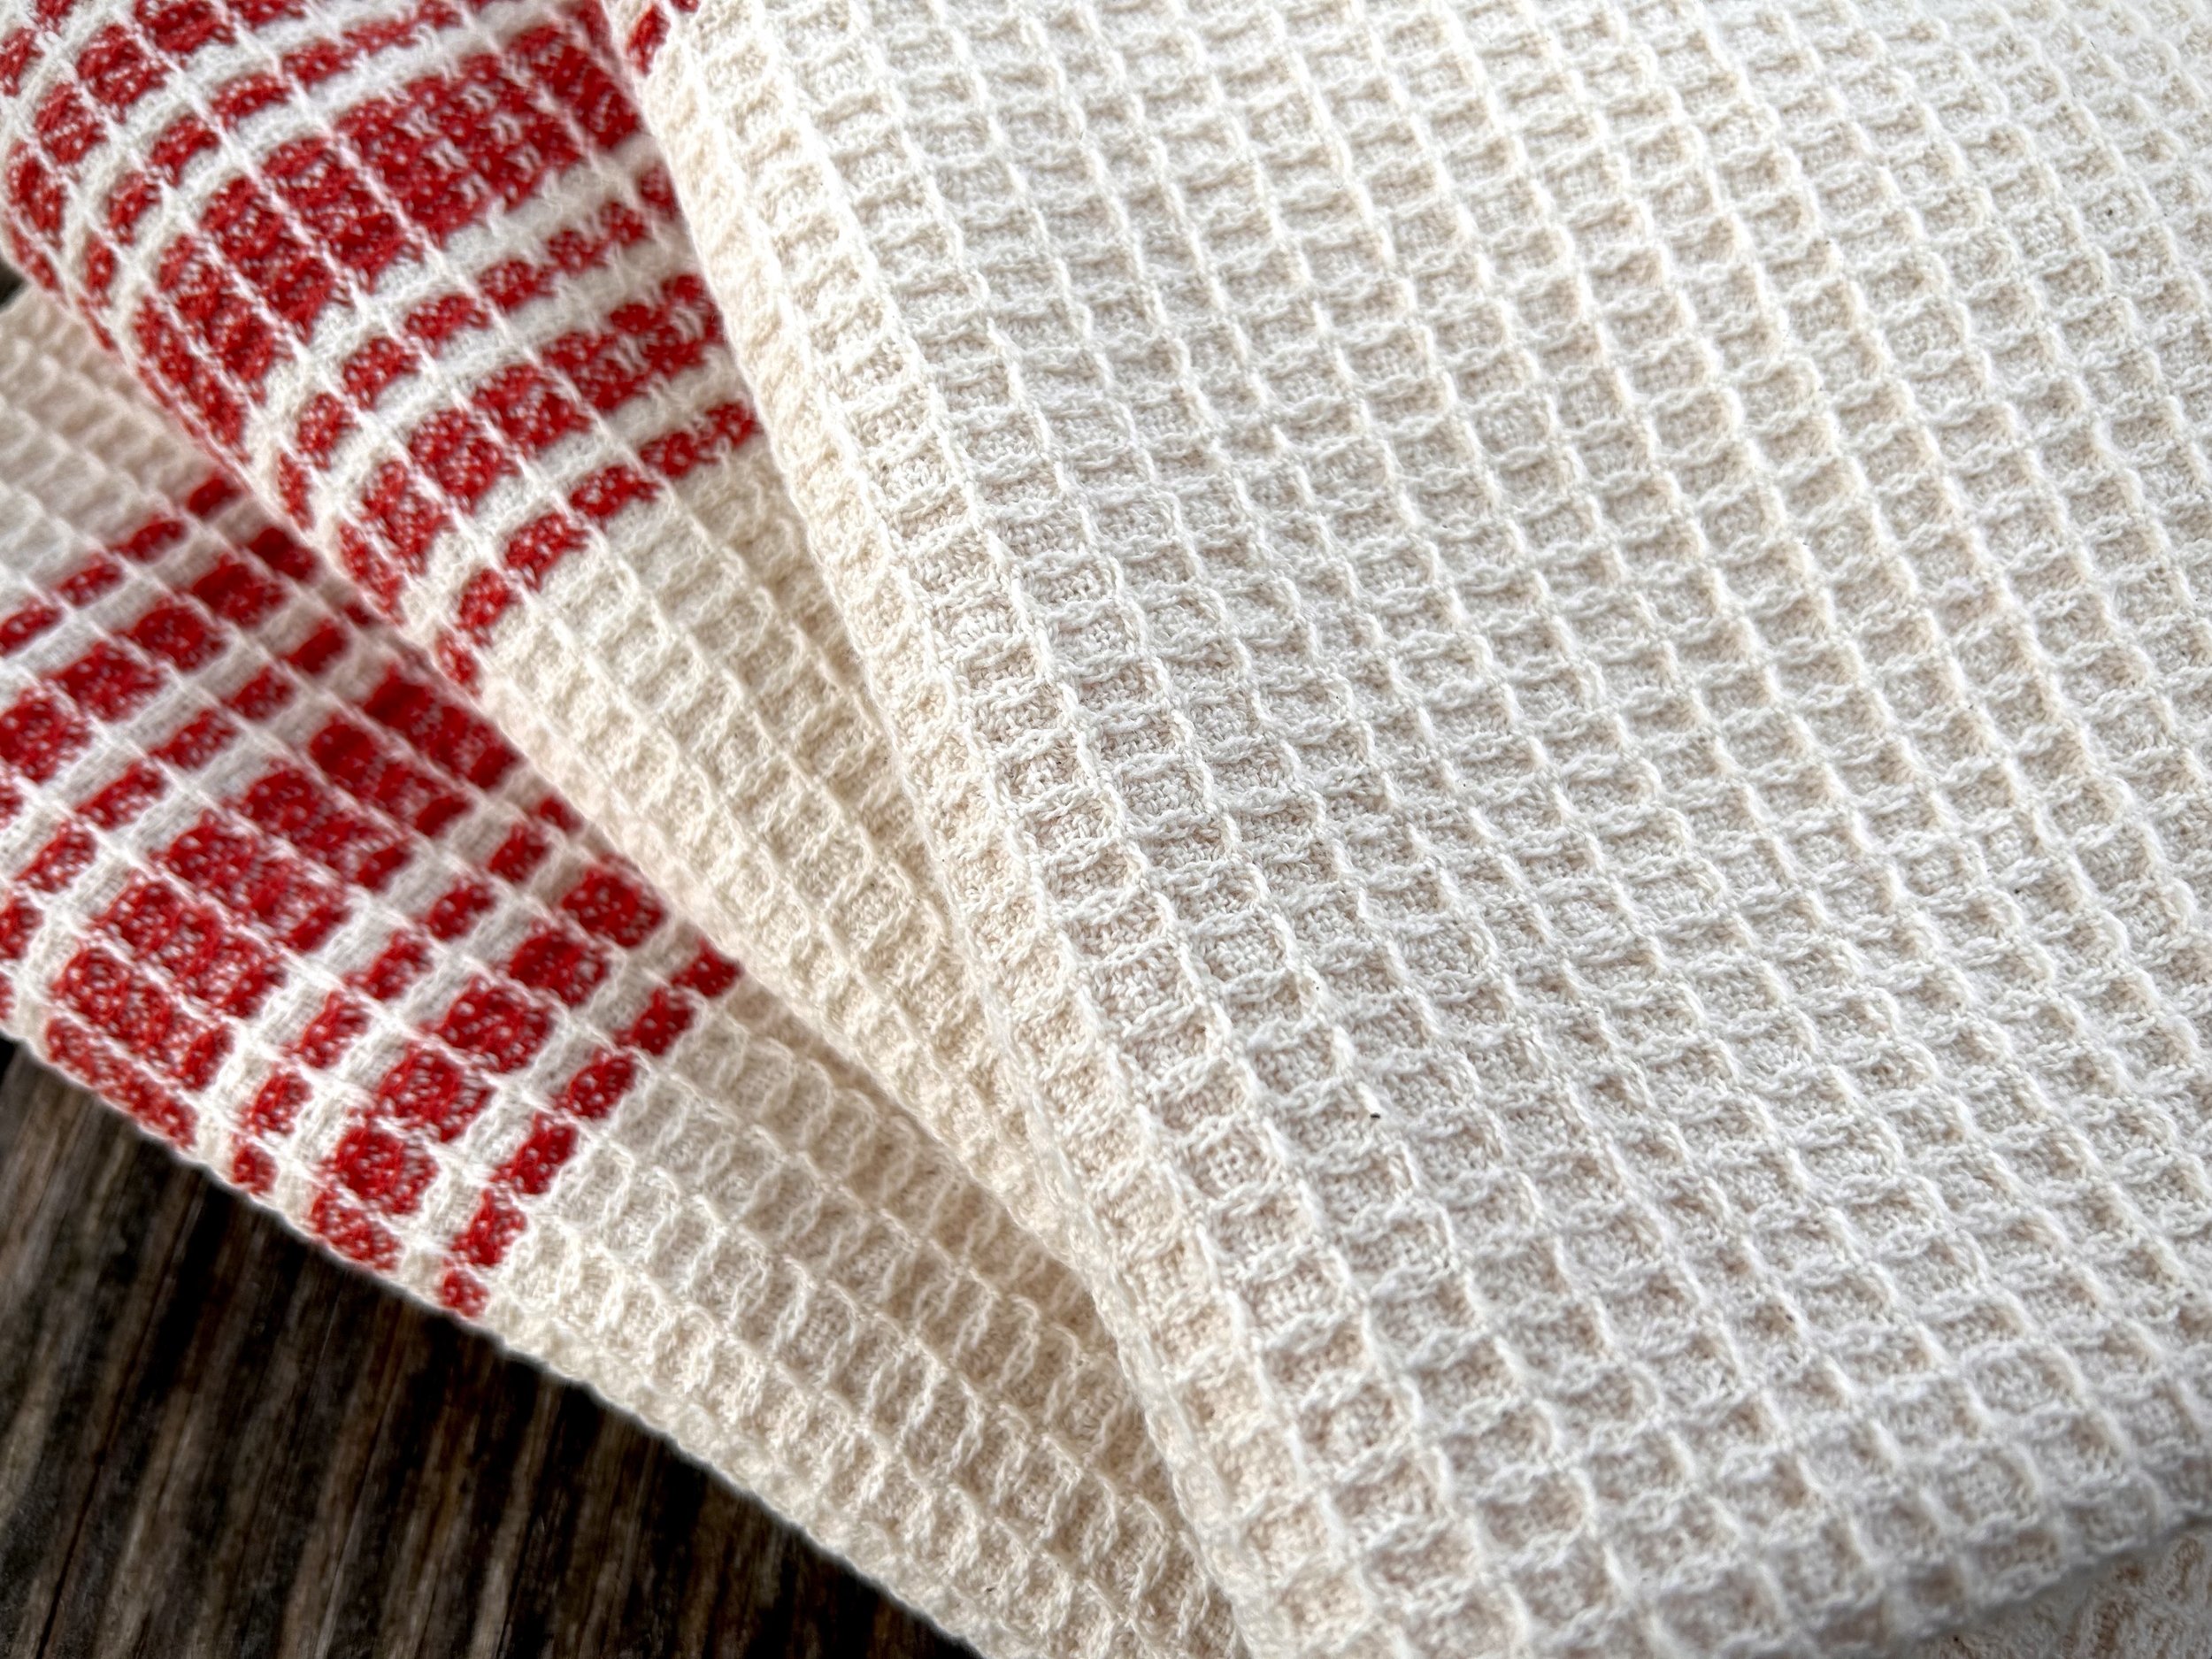  Waffle weave towels (detail) 